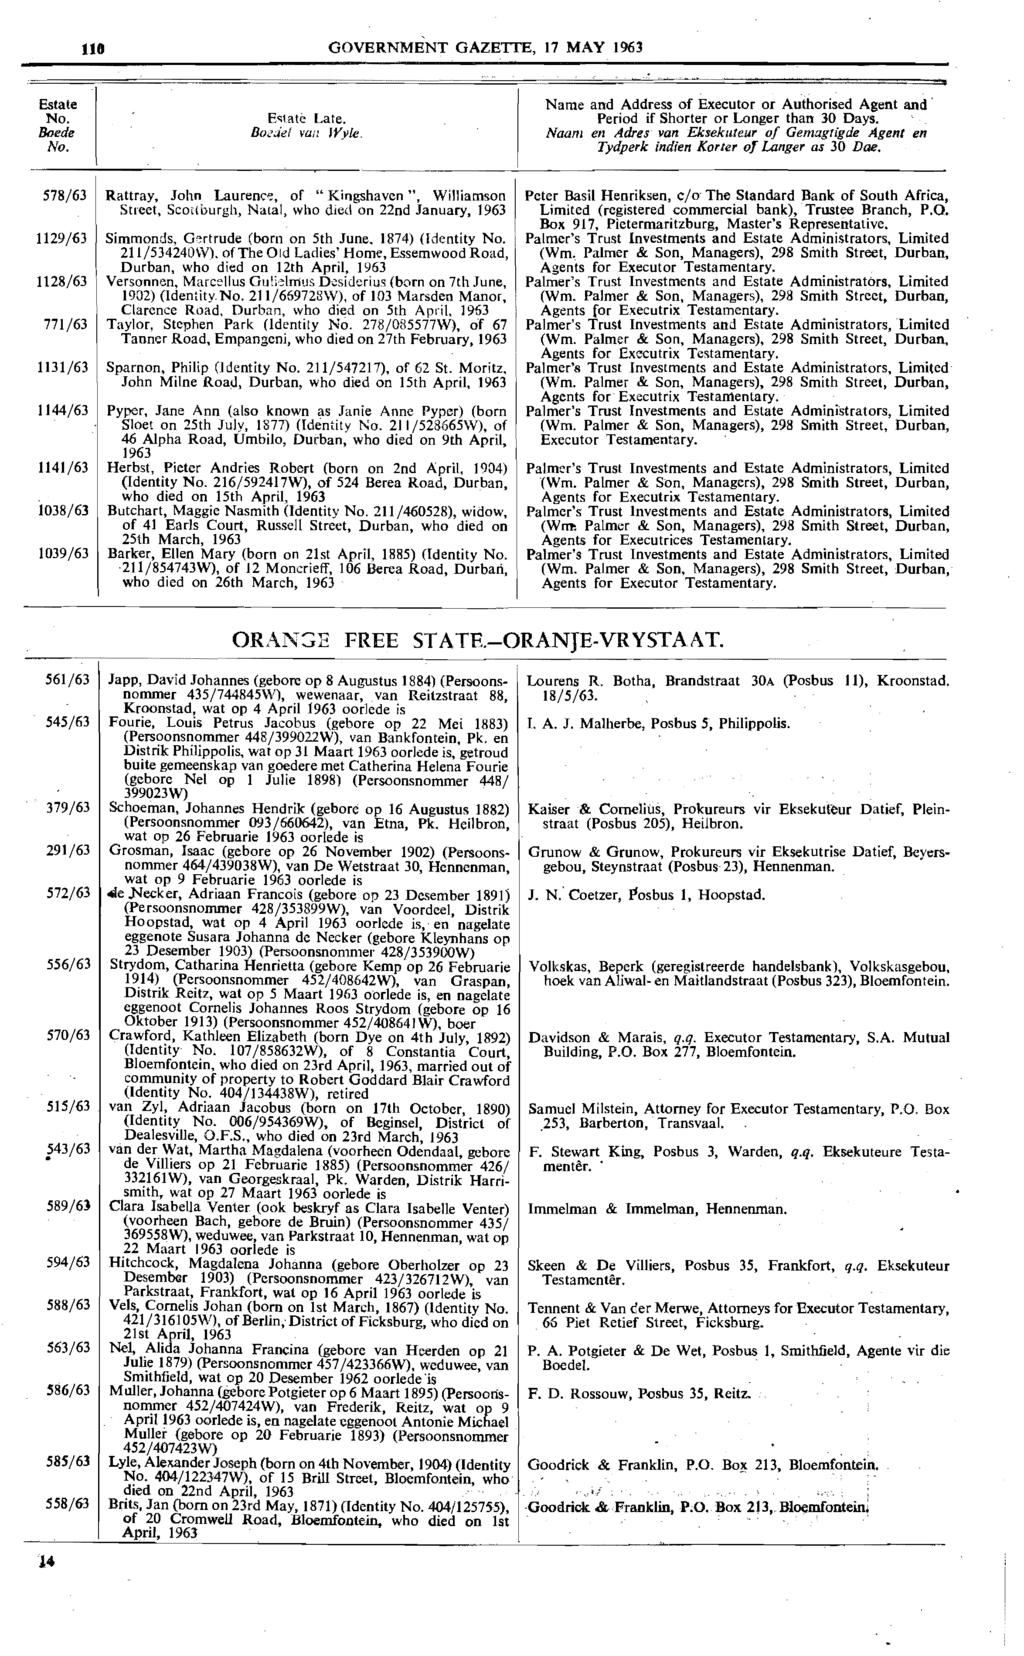 lie GOVERNMENT GAZETTE, 17 MAY 1963 Estate No. Boede No. Name and Address of Executor or Authorised Agent and' E~(ate Late. Period if Shorter or Longer than 30 Days.